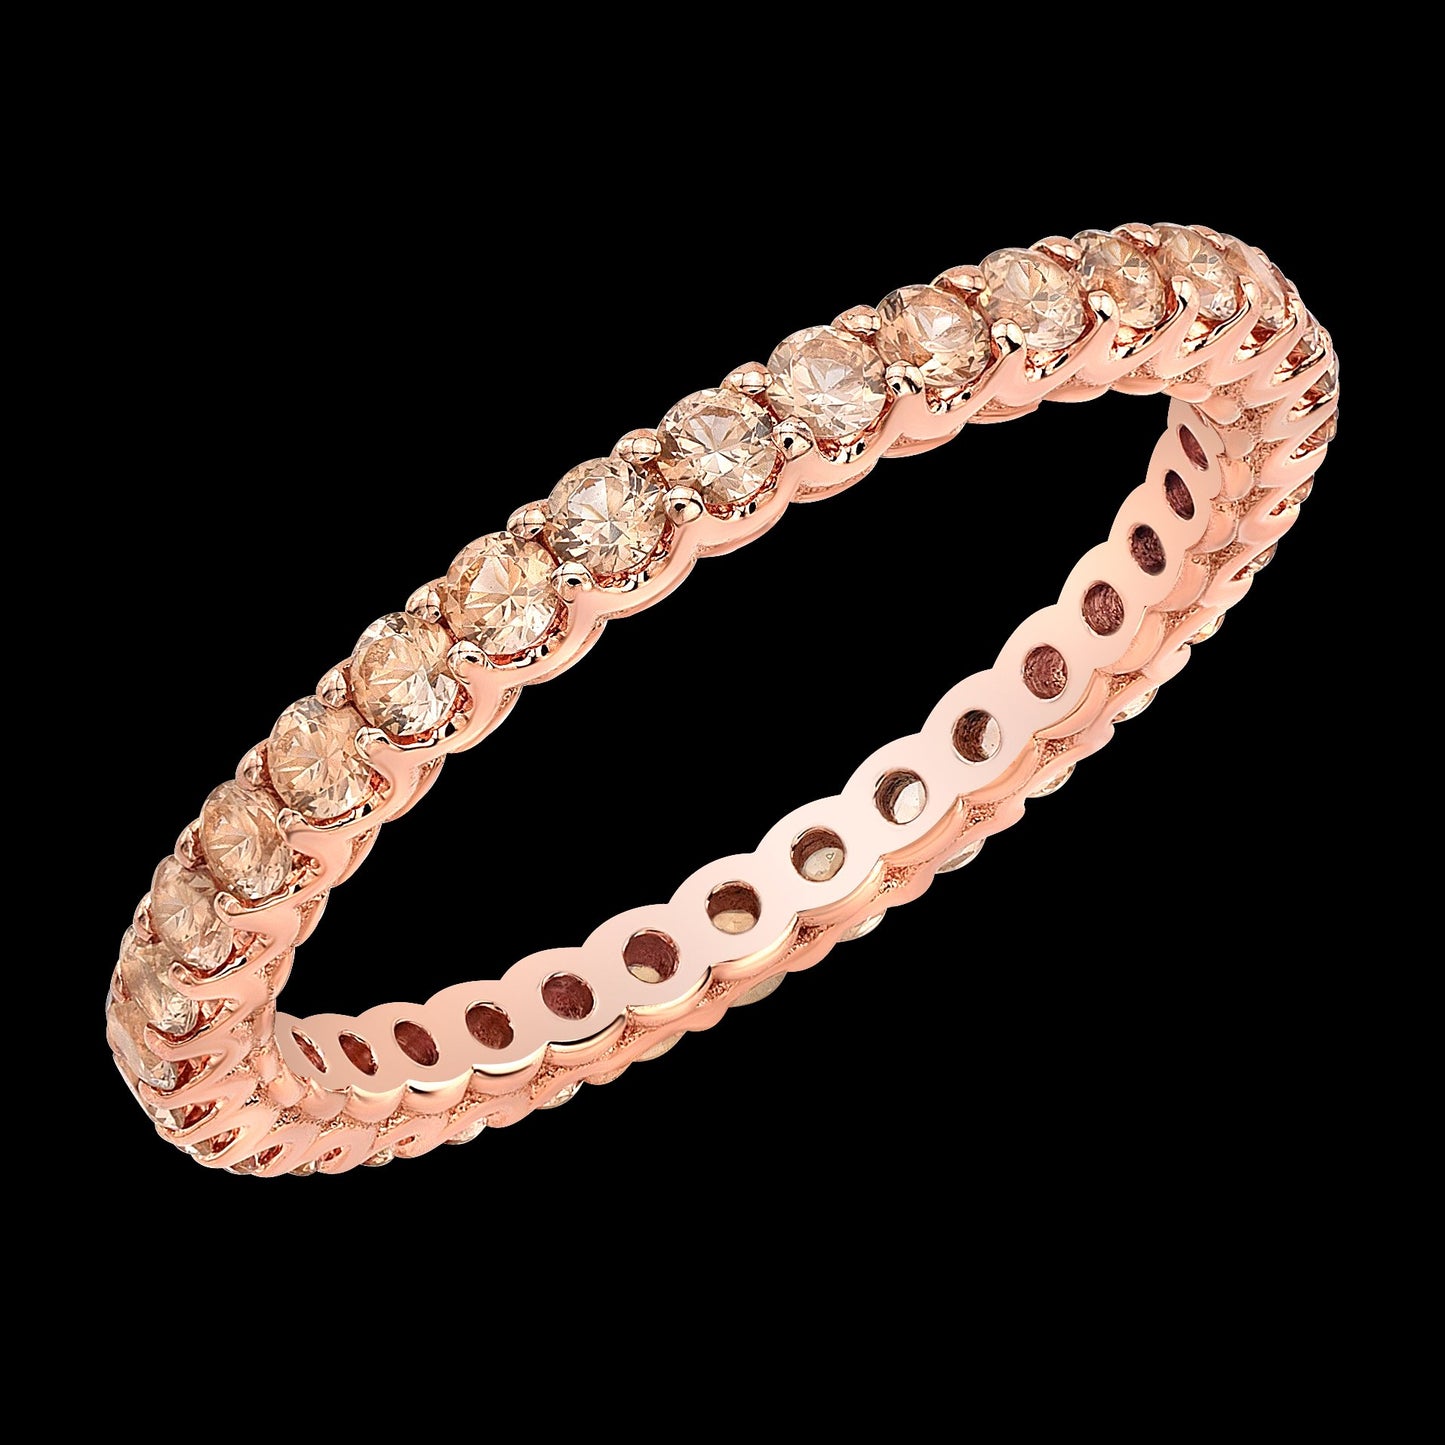 Andalusite Gemstone Eternity Band in 18k Yellow Gold